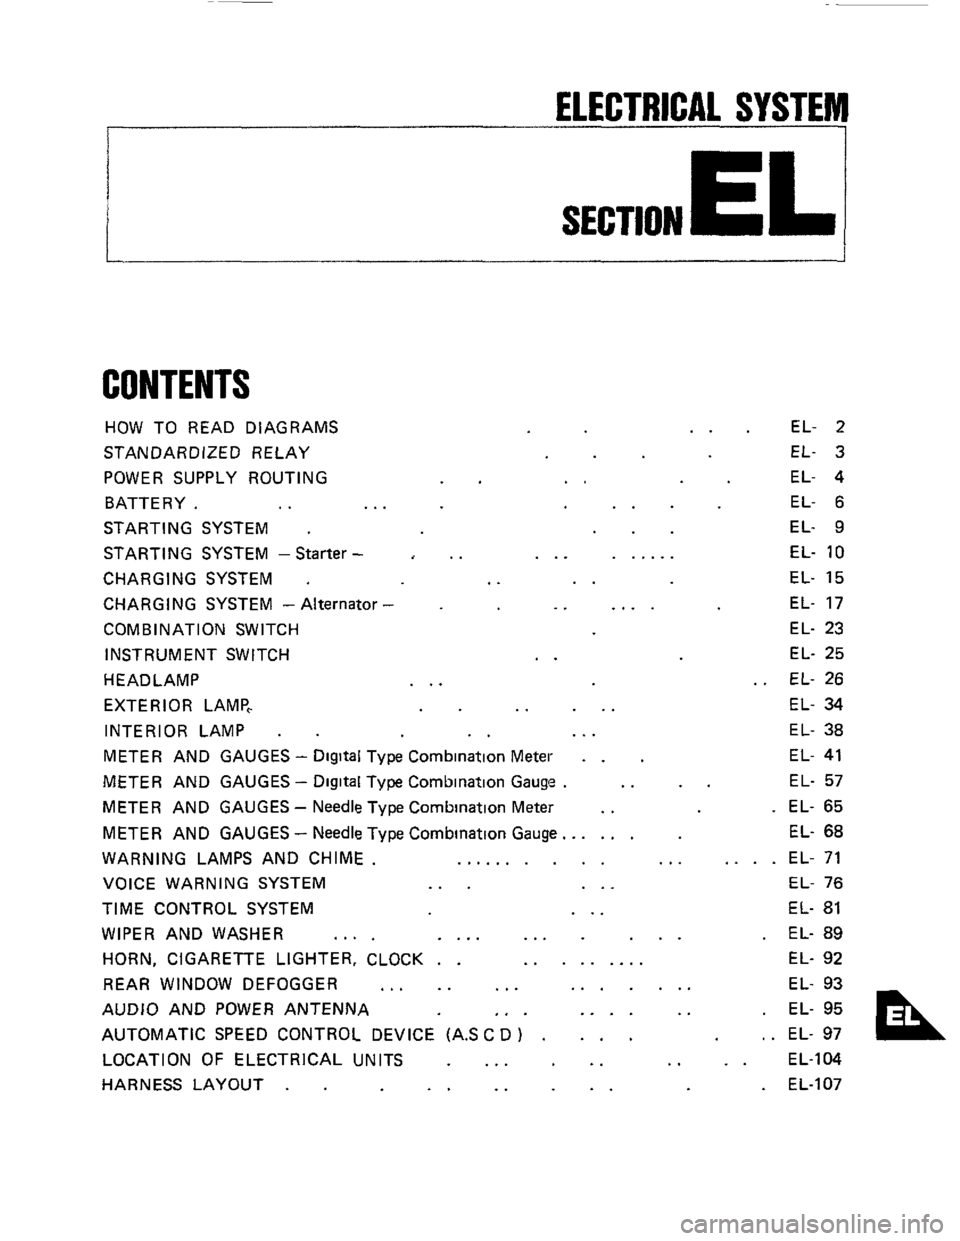 NISSAN 300ZX 1984 Z31 Electrical System Workshop Manual ELECTRICAL SYSTEM 
I 
SECTION EL 
CONTENTS 
HOW TO  READ  DIAGRAMS 
STANDARDIZED  RELAY 
POWER  SUPPLY  ROUTING 
BATTERY. 
..  .. 
STARTING  SYSTEM . 
STARTING SYSTEM -Starter - 
CHARGING  SYSTEM . 
C